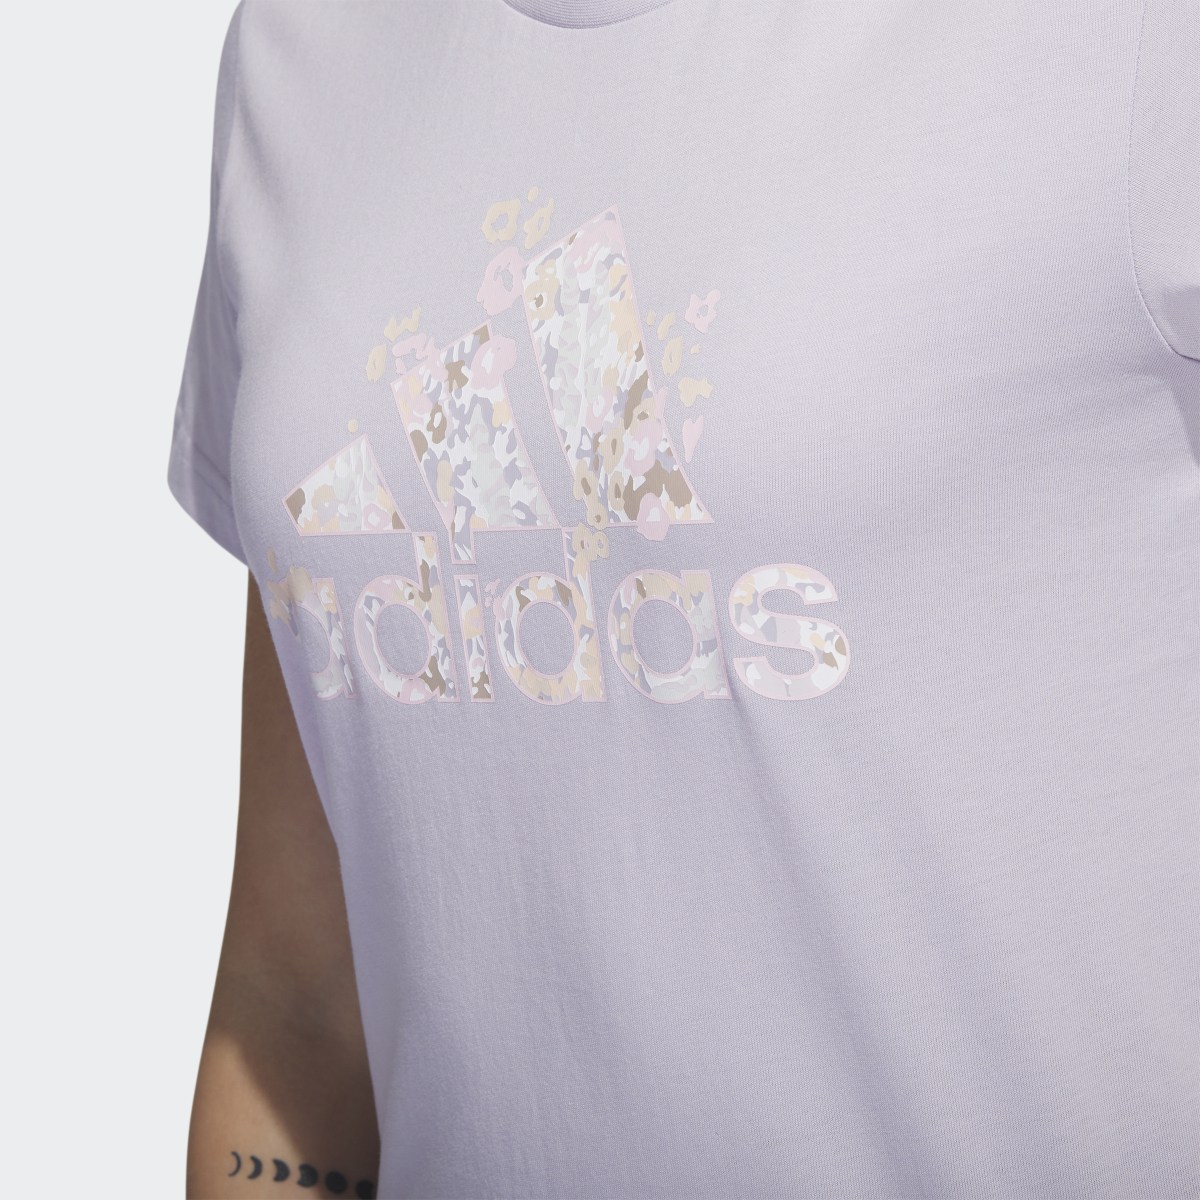 Adidas Floral Badge of Sport Graphic Tee. 6